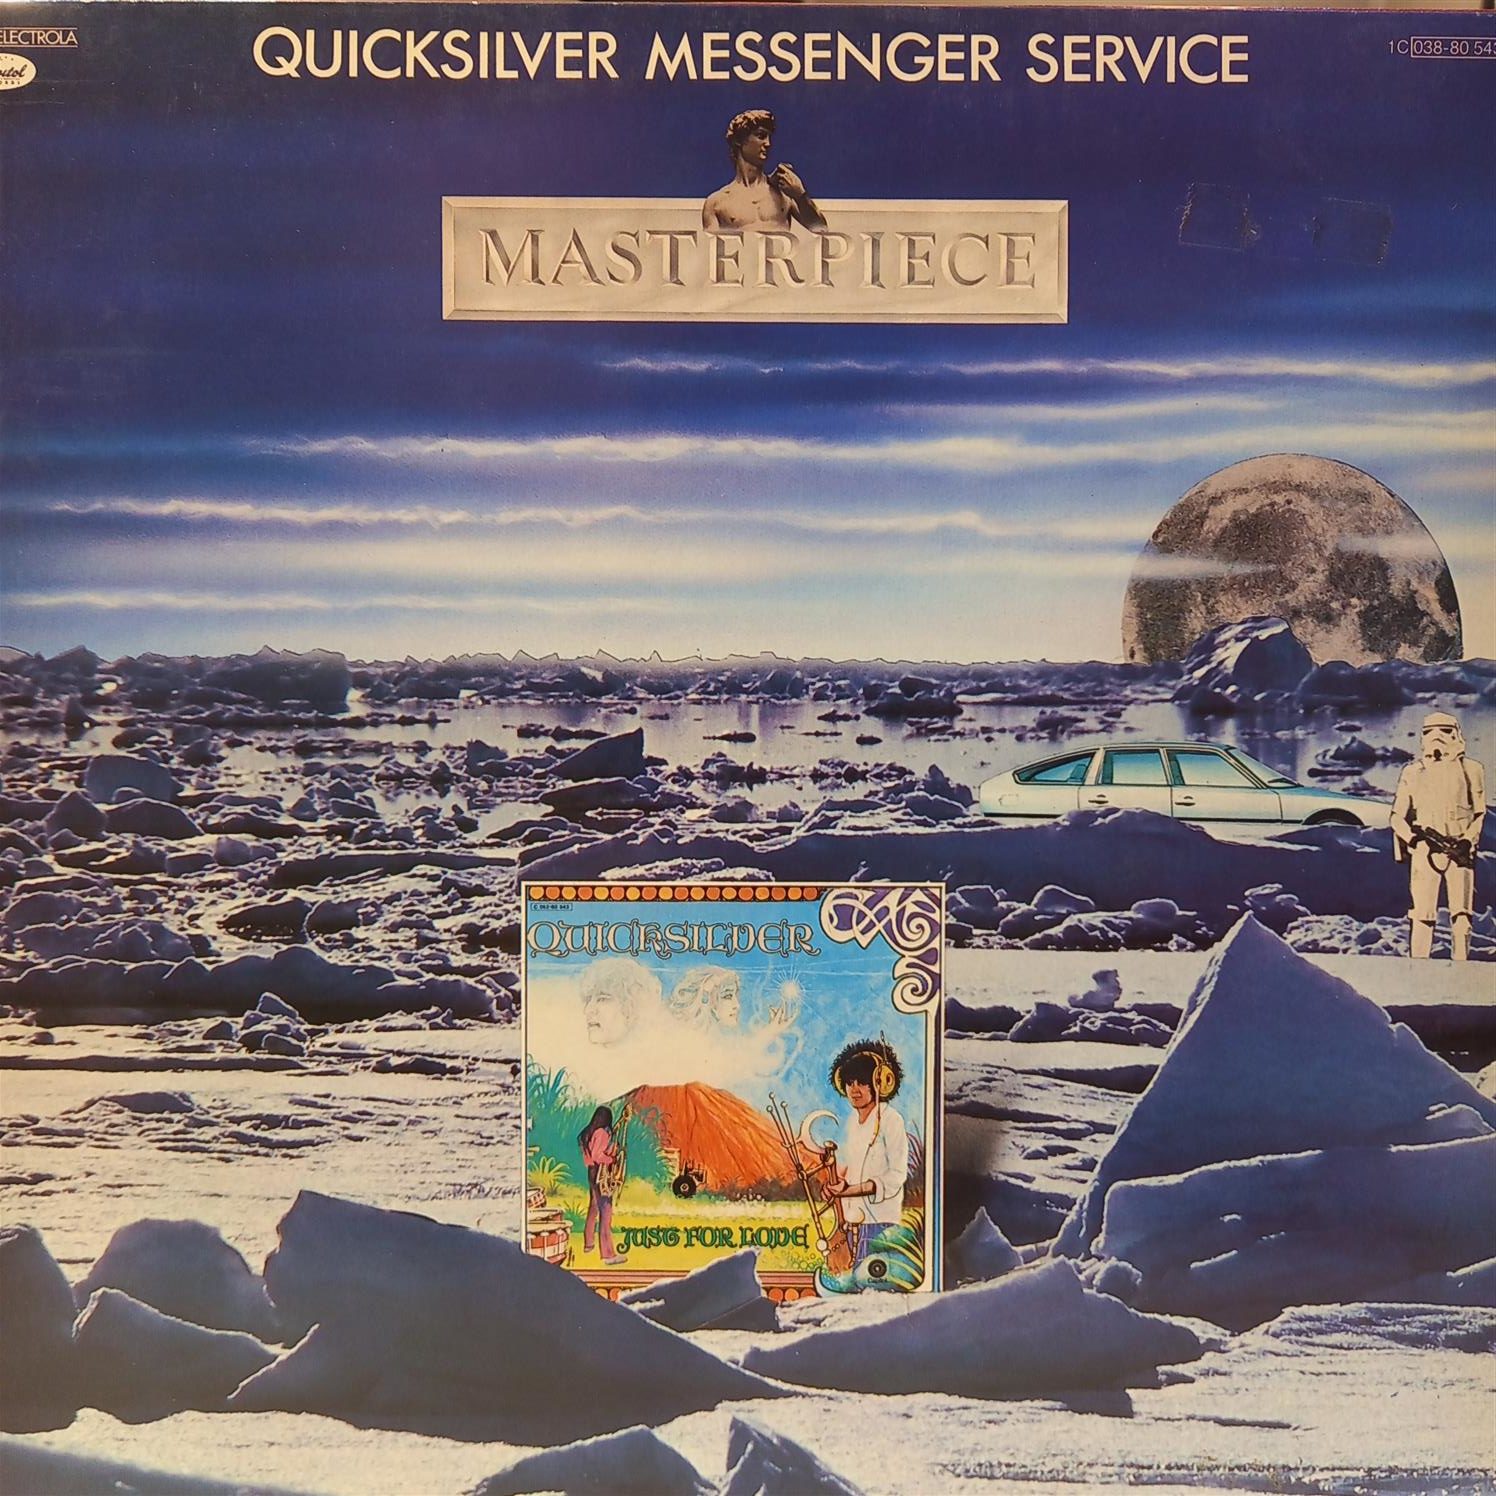 QUICKSILVER MESSENGER SERVICE – JUST FOR LOVE ON